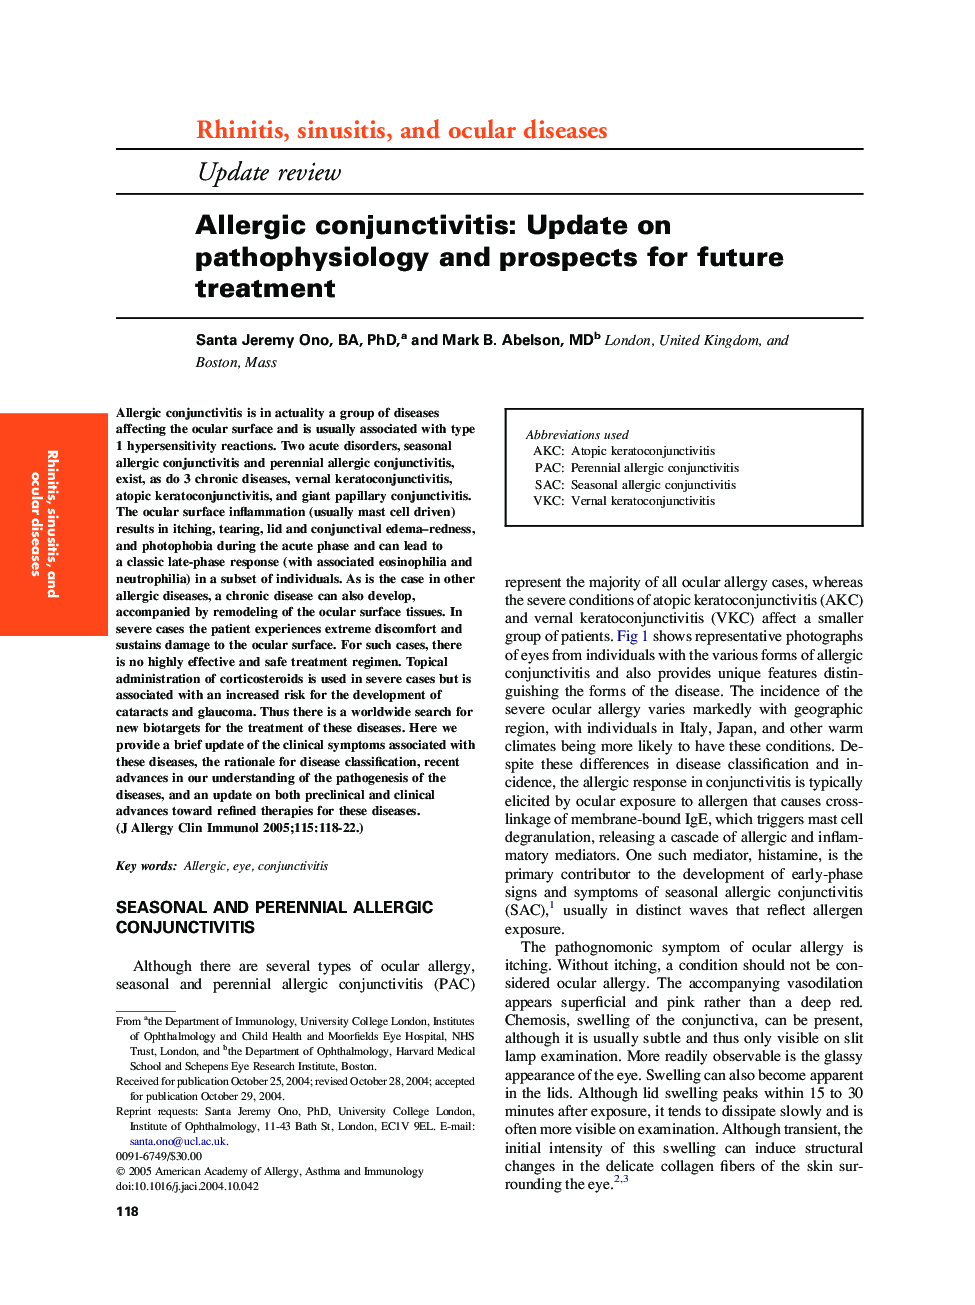 Allergic conjunctivitis: Update on pathophysiology and prospects for future treatment